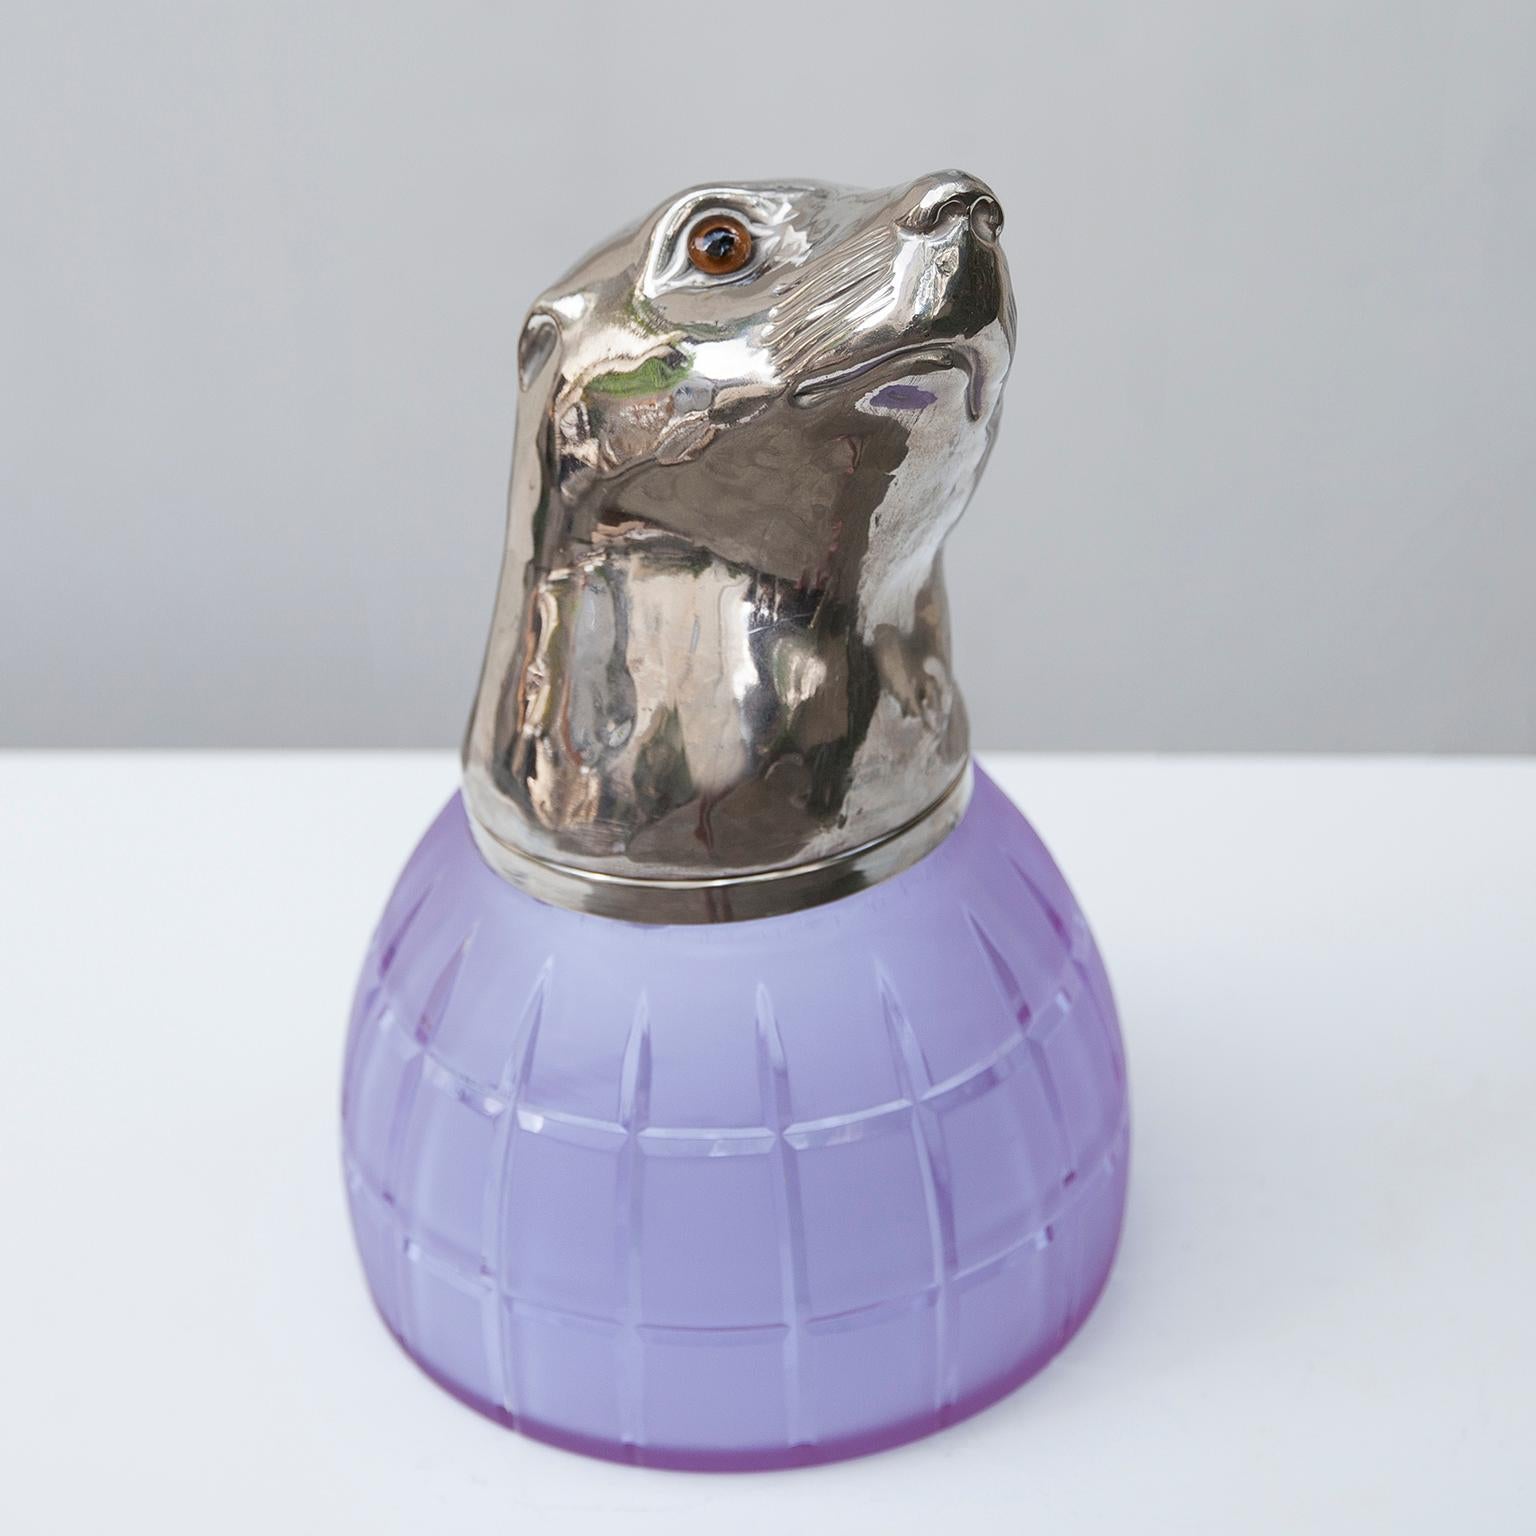 Franco Lapini exquisite seal sculpture is made entirely of metal plated in silver and its surface is lightly textured to give it an organic feel, the purple Murano glass gracing a striking contrasts to the silver. You can open the head and use for